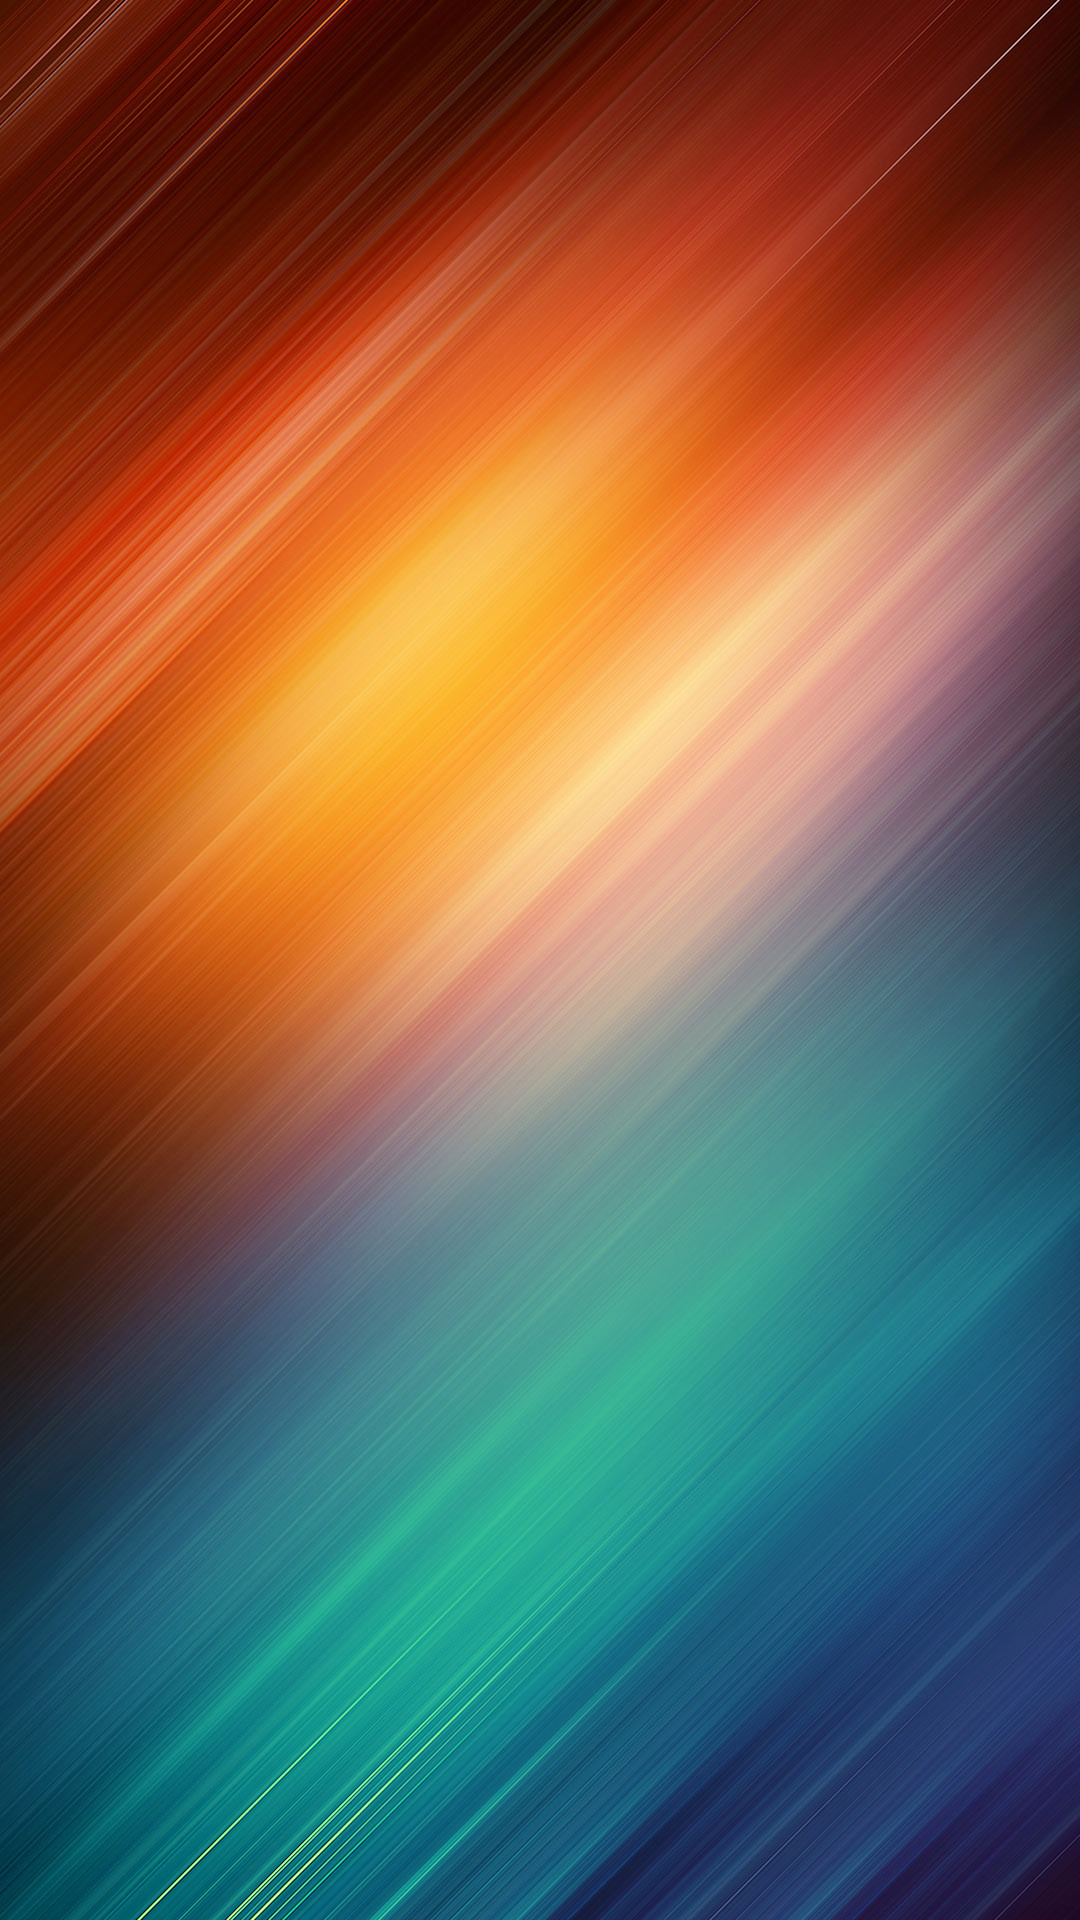 35+ Cool and Awesome iPhone 6 Wallpapers in HD Quality